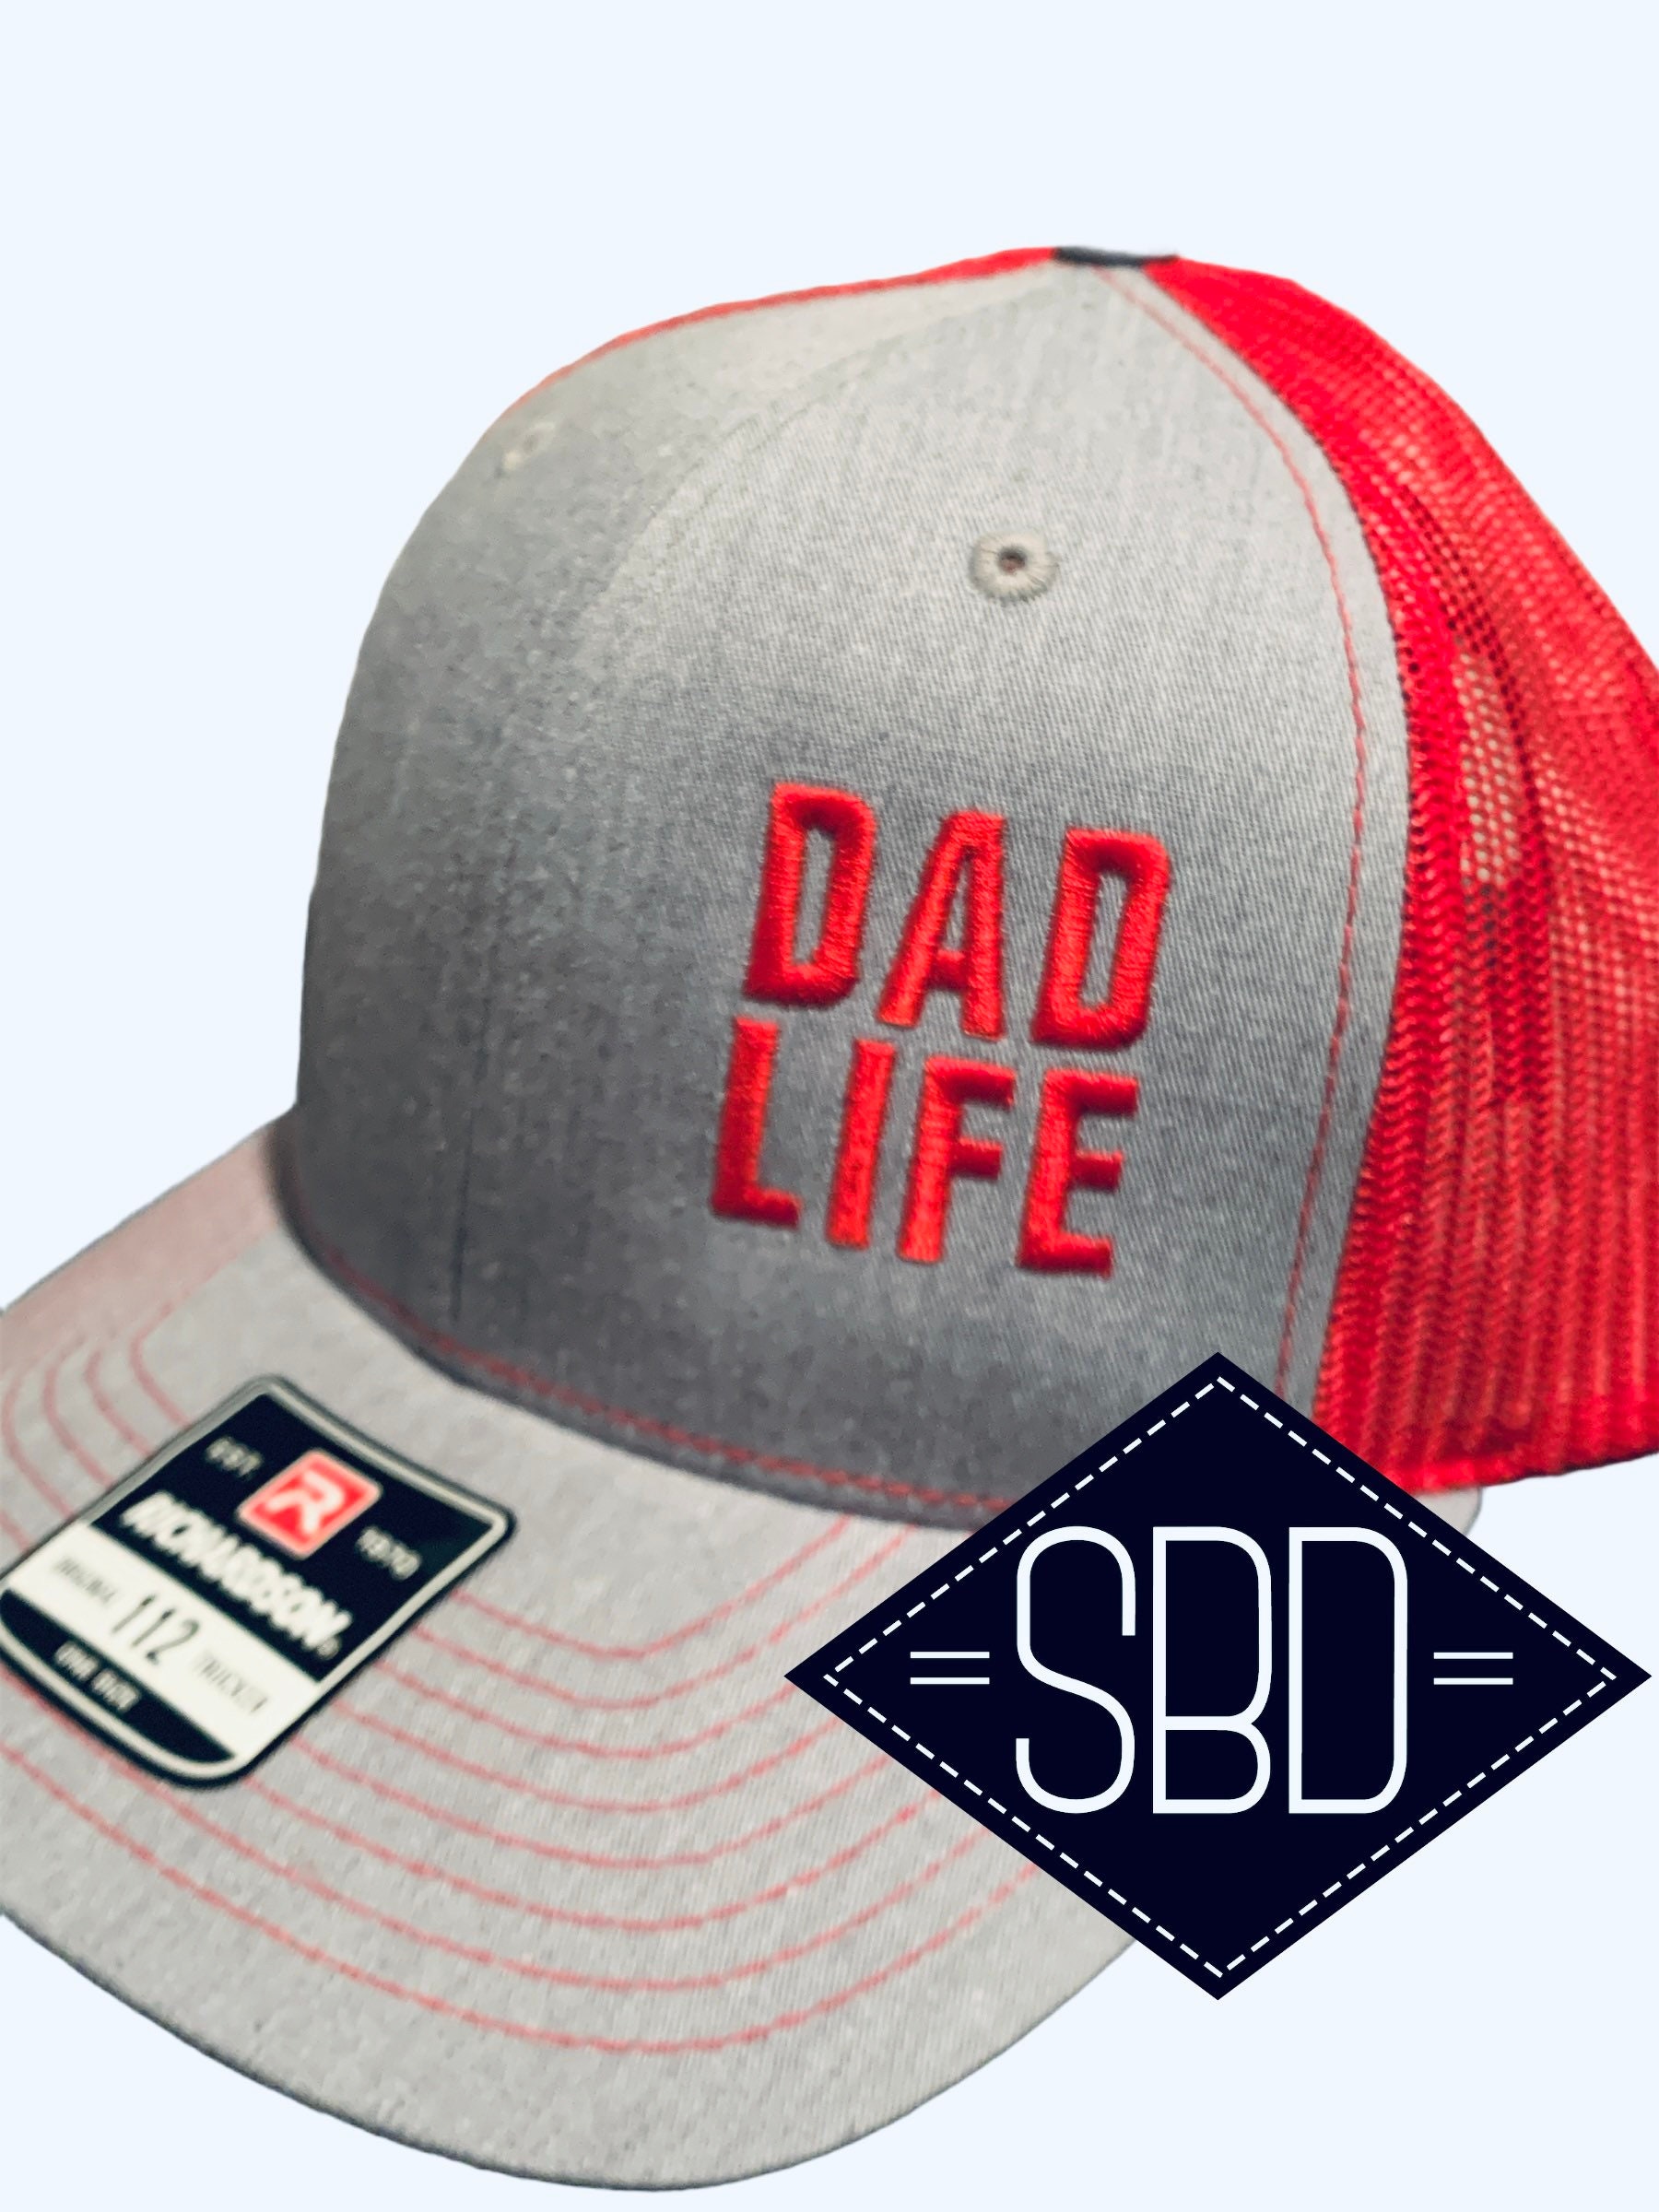 DAD LIFE Embroidered Hat Structured Dad hat Dad Birthday | Etsy